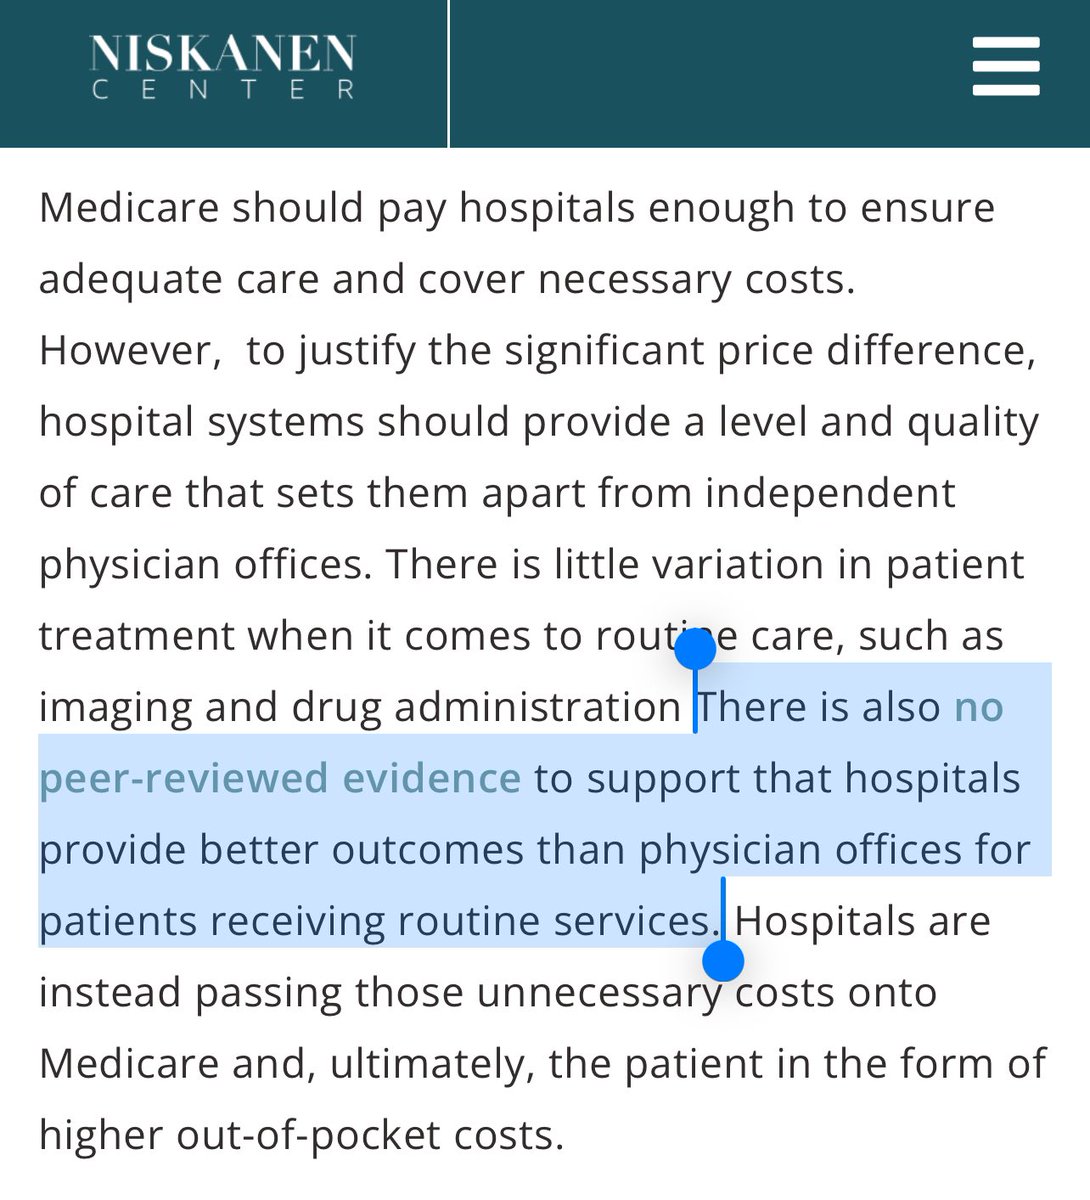 Current Medicare rules pay almost double for routine services if they are done at a hospital rather than at a physician’s office, despite the fact that: a) there is no evidence that suggests better outcomes b) this has lead to a lot of industry consolidation to game the system